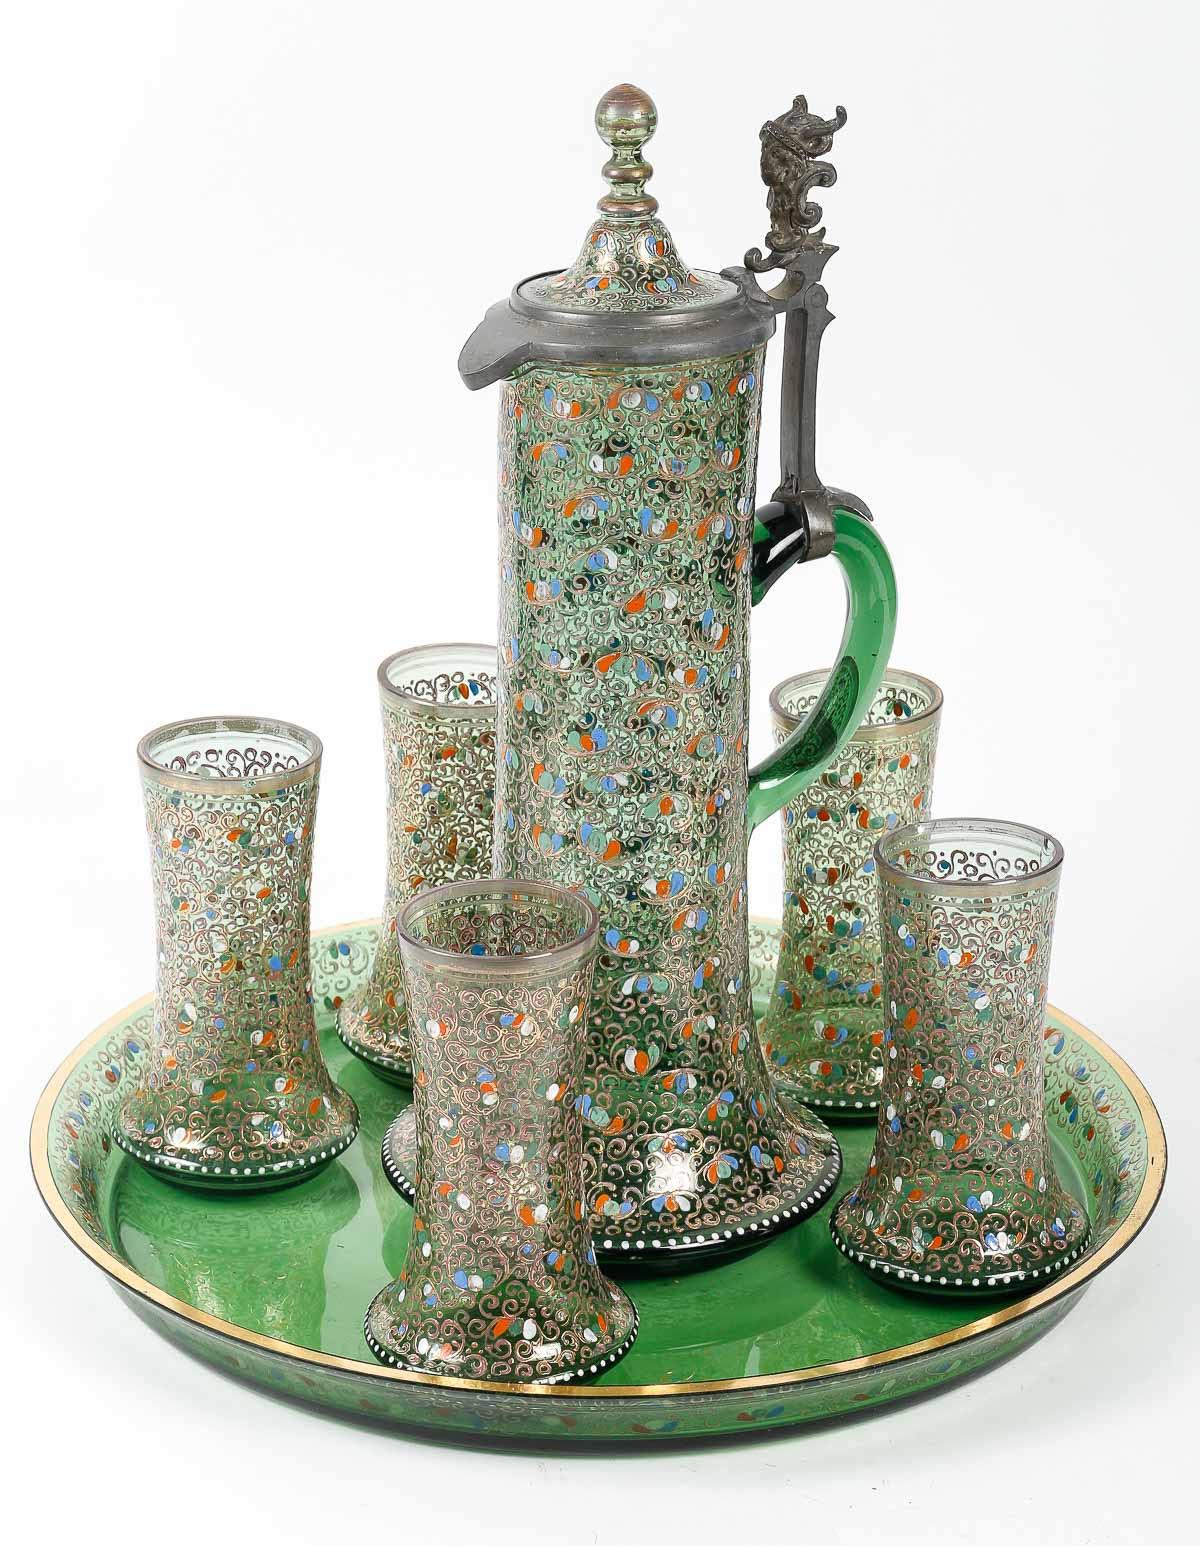 Orangeade service in enamelled Moser crystal, 19th century.

Enamelled Moser crystal orangeade service, the decanter mounted in pewter, (5 glasses, the tray and the decanter), 19th Century, Napoleon III period, slight chips to two